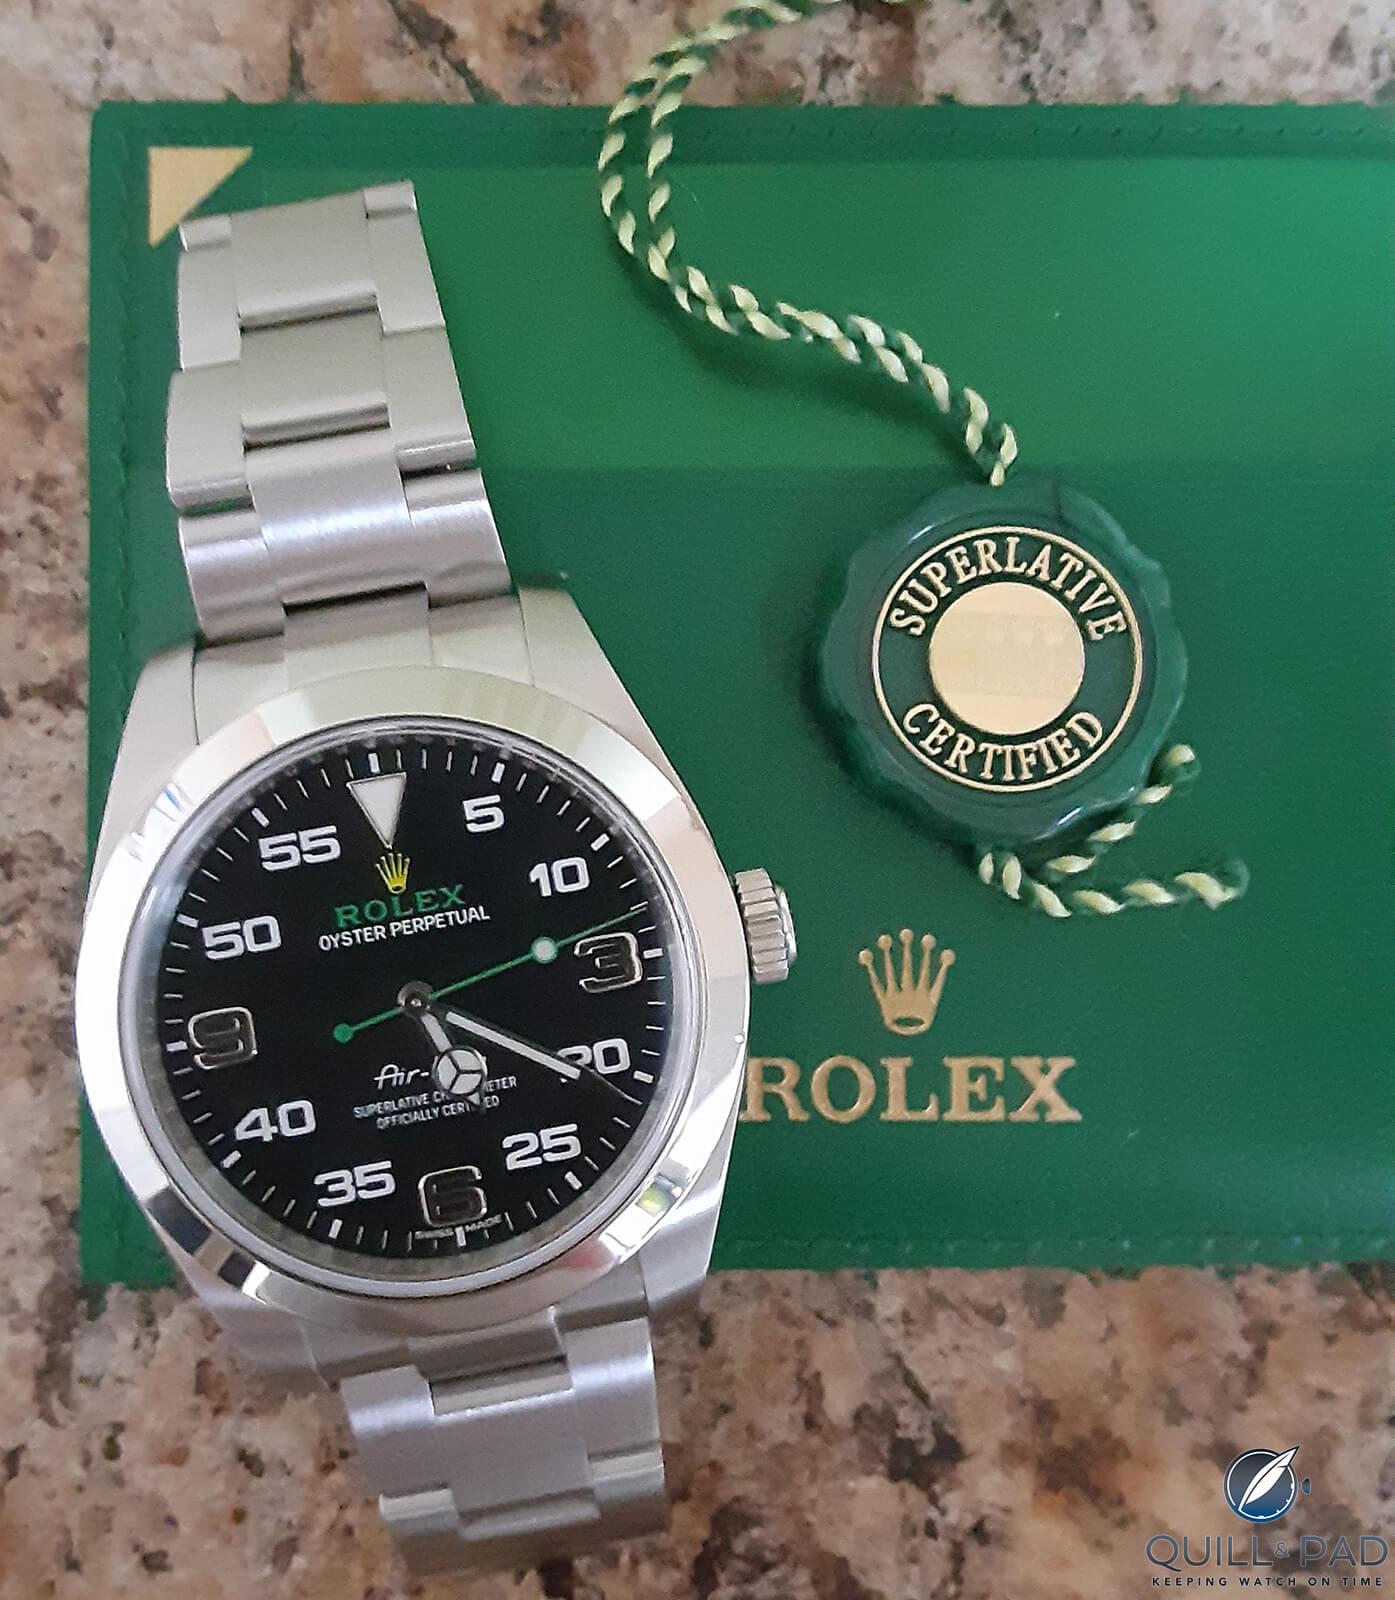 Why I Bought It: Rolex Air-King “Bloodhound” Ref. 116900